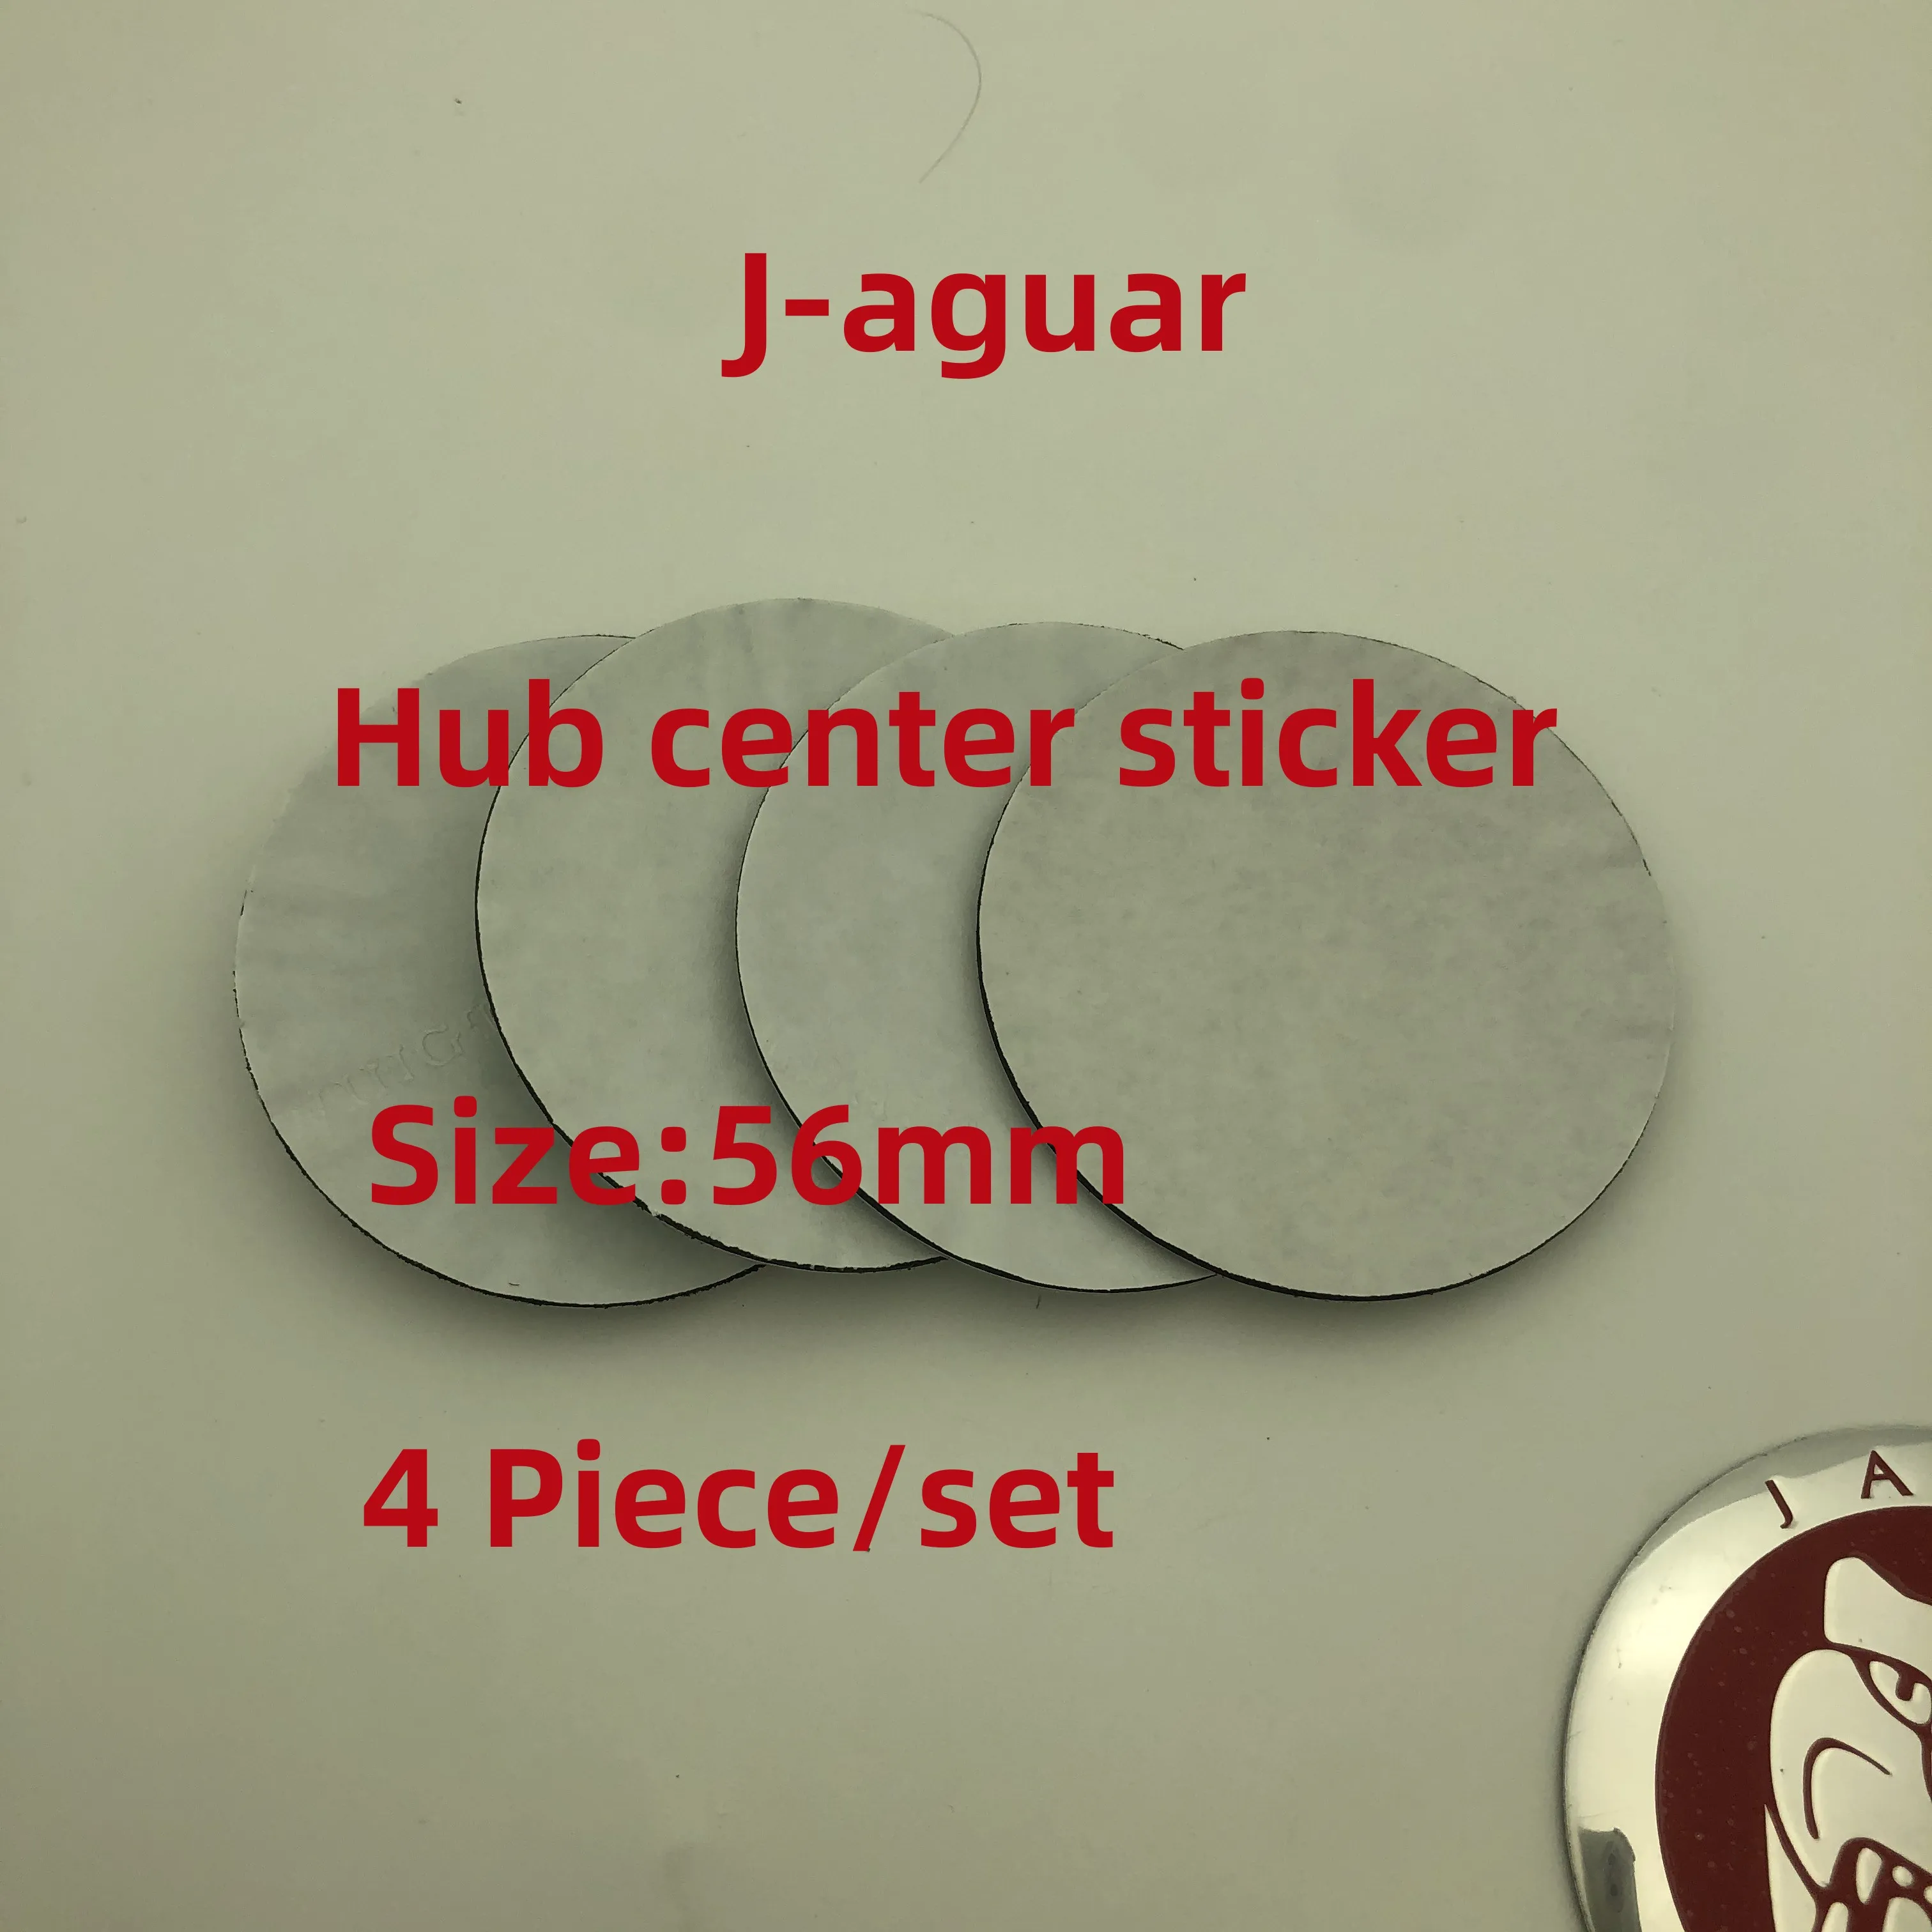 

56mm Car Wheel Rims Center Hupcaps Stickers For J-aguar E-Pace E-type XE XK XJ XF F Pace F-type X-type S-type XJS XJL XJ6 XKR